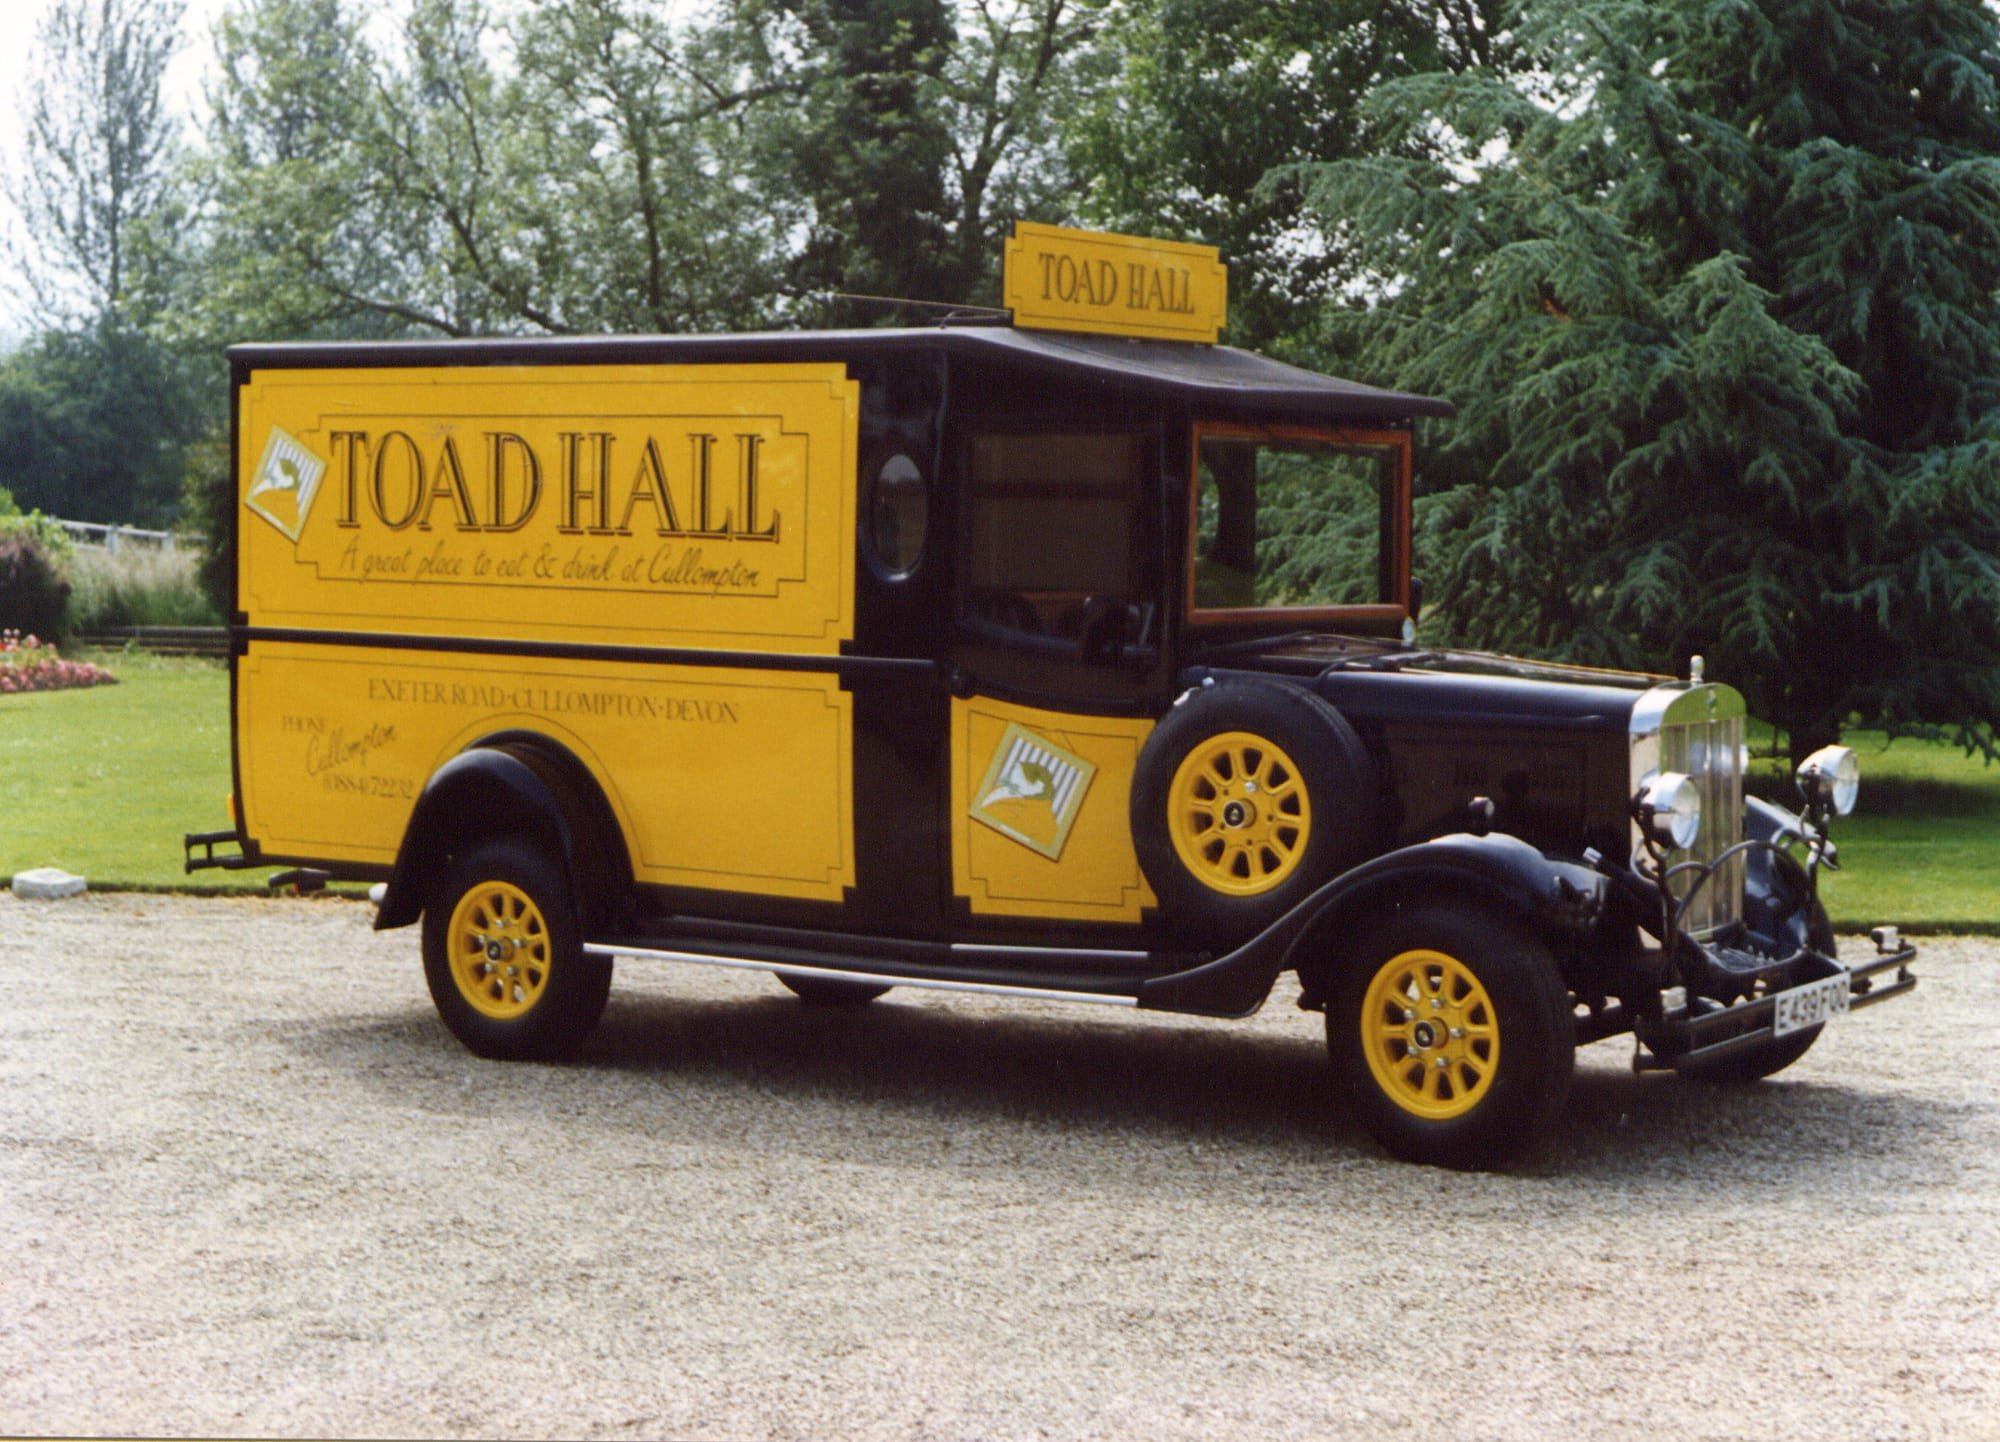 Asquith Shire for Toad Hall (UK)